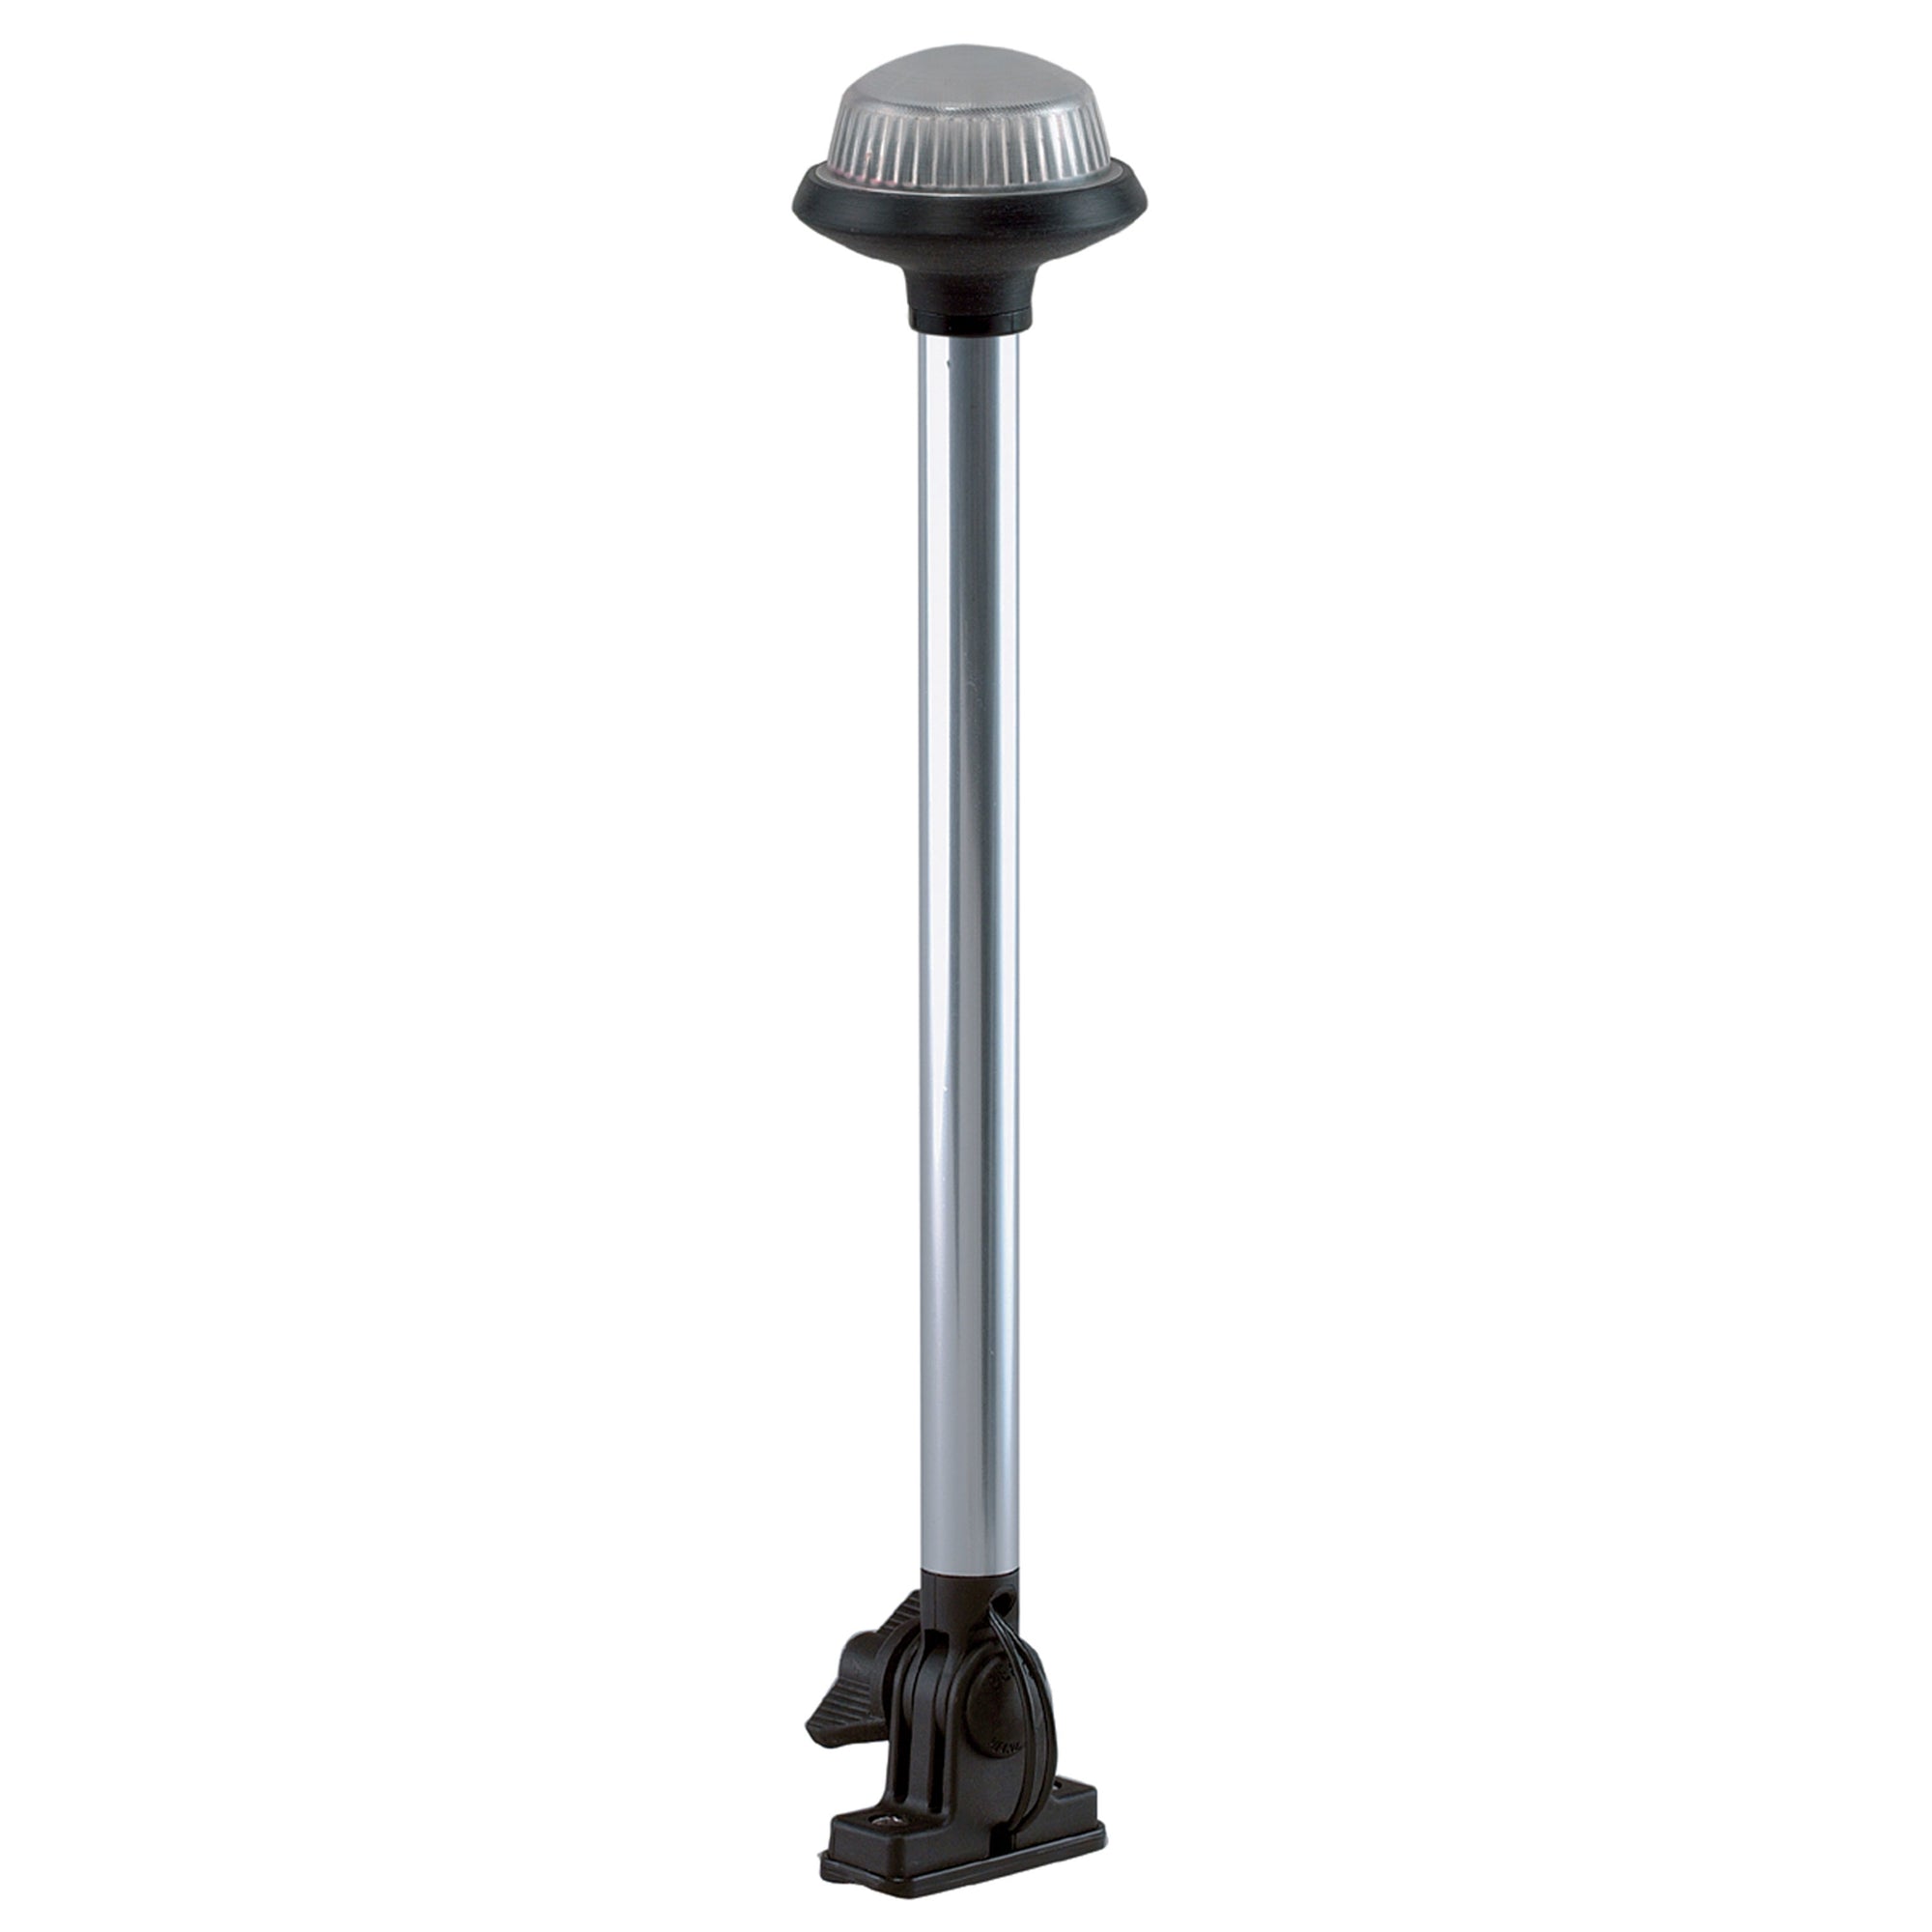 Perko 1637DP0CHR Vertical-Mount Fold Down White All-Round Pole Light - 14-1/8" Height, Black Polymer Base and Top